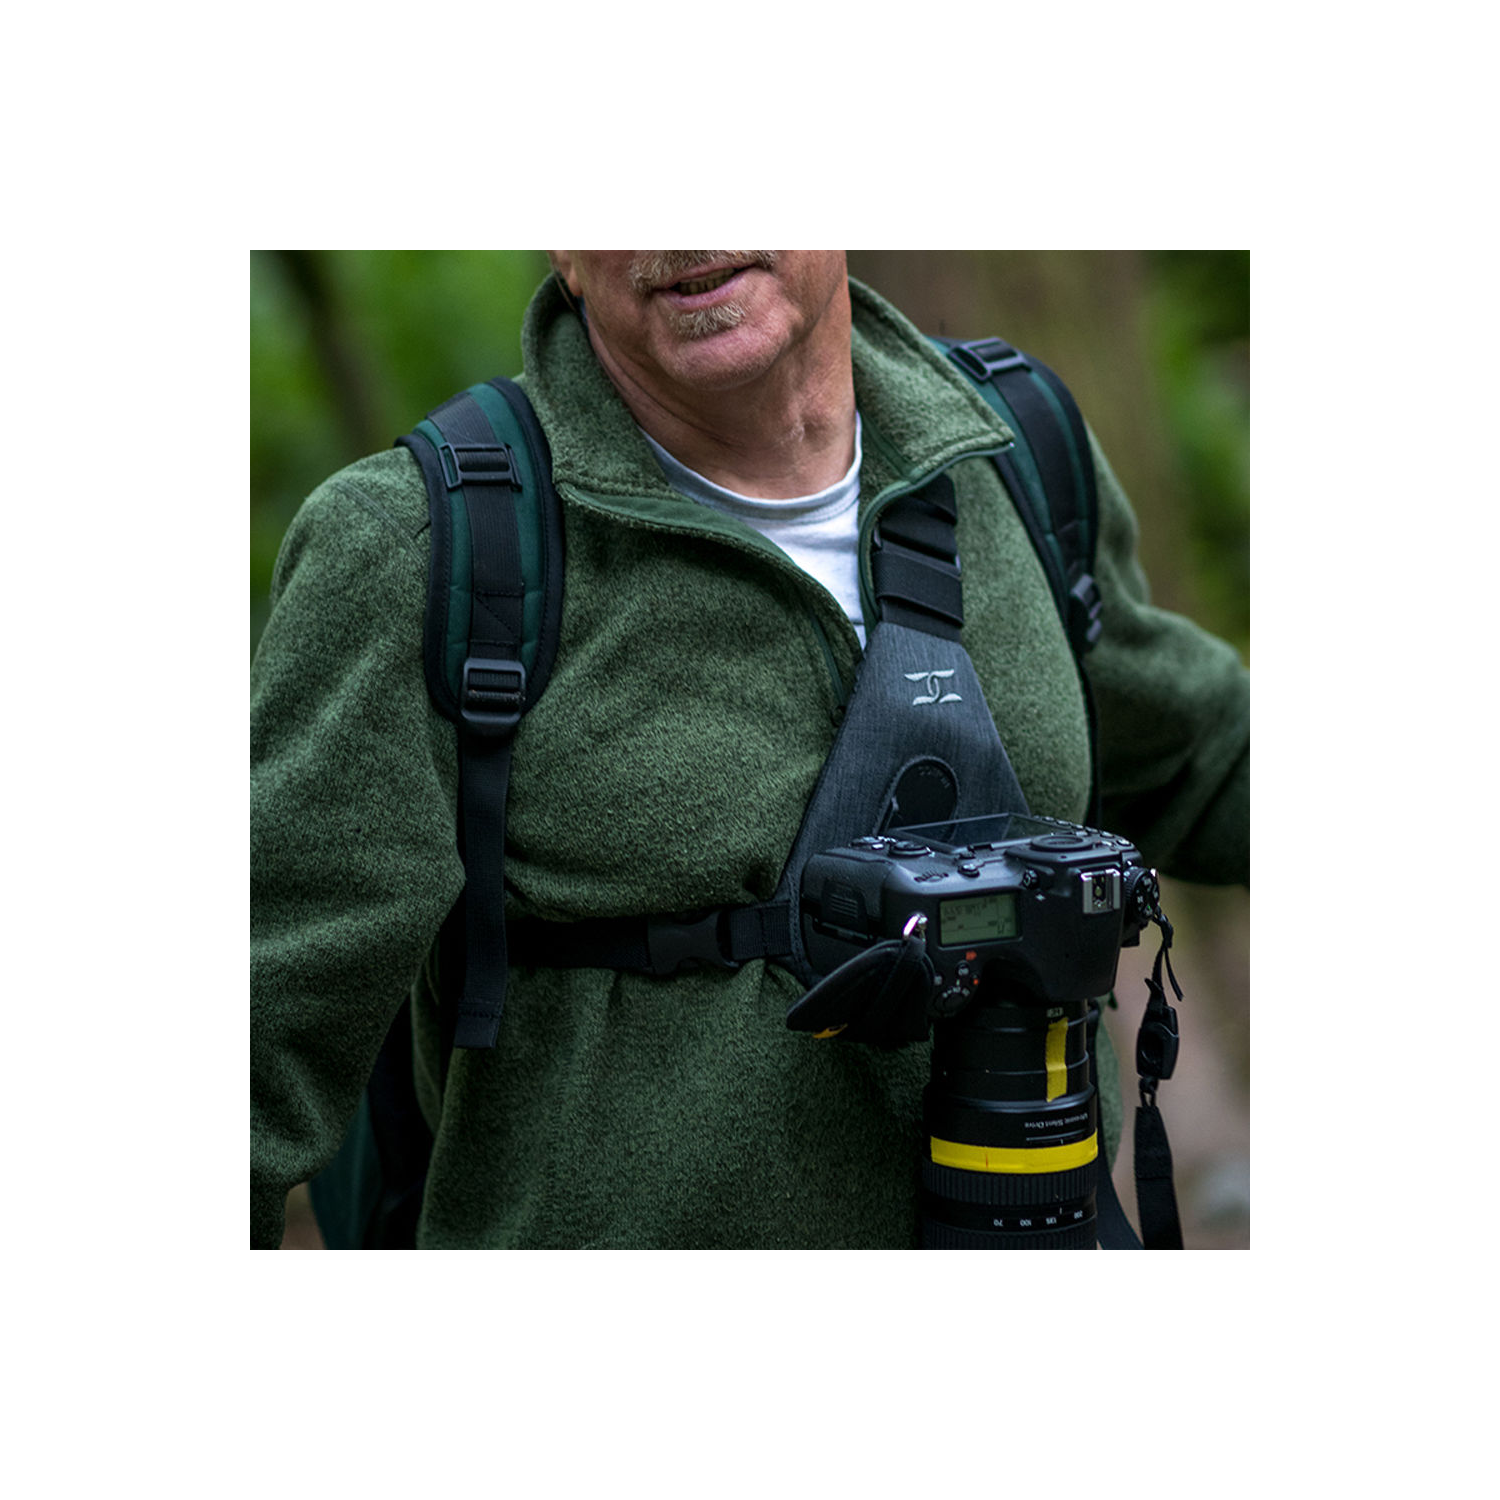 Cotton Carrier SKOUT G2 Sling-Style Harness for Binoculars, Realtree Xtra